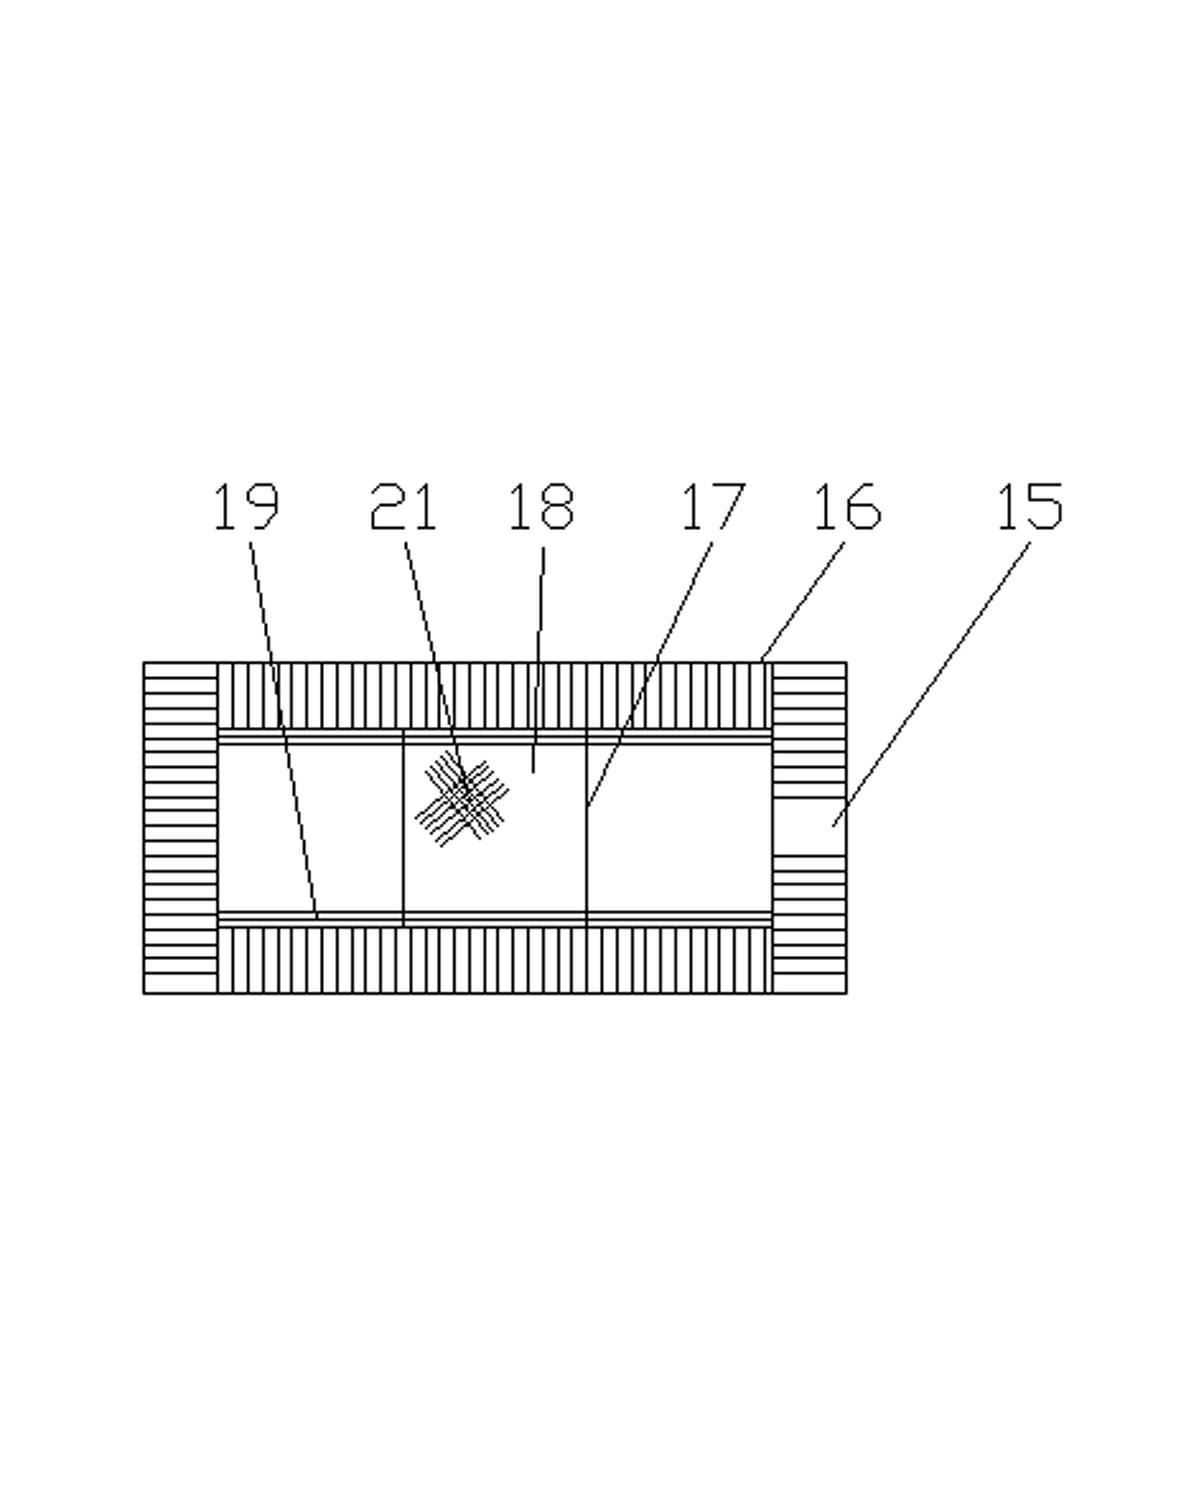 Mechanical fishing device for aquiculture fixed platform and application thereof